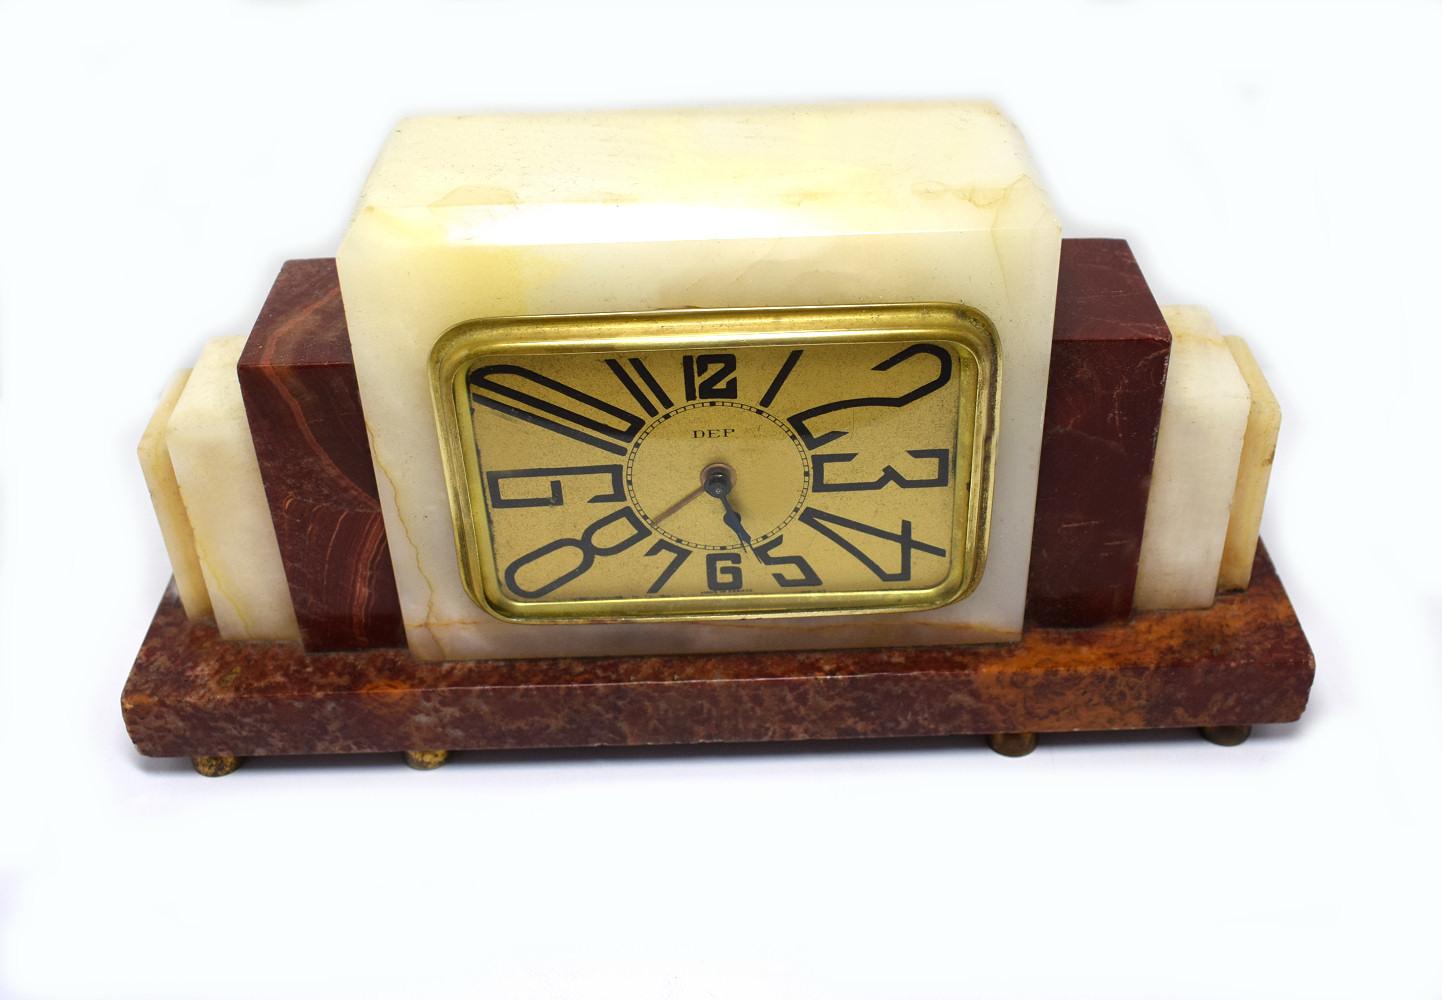 Very striking 1930s Art Deco French clock by Dep. The case is solid multicolored onyx, the bezel and face are in gold tone metal. Very iconic Art Deco stretched numerals. This clock is a really cute size and ideal as a bedroom clock or side table,